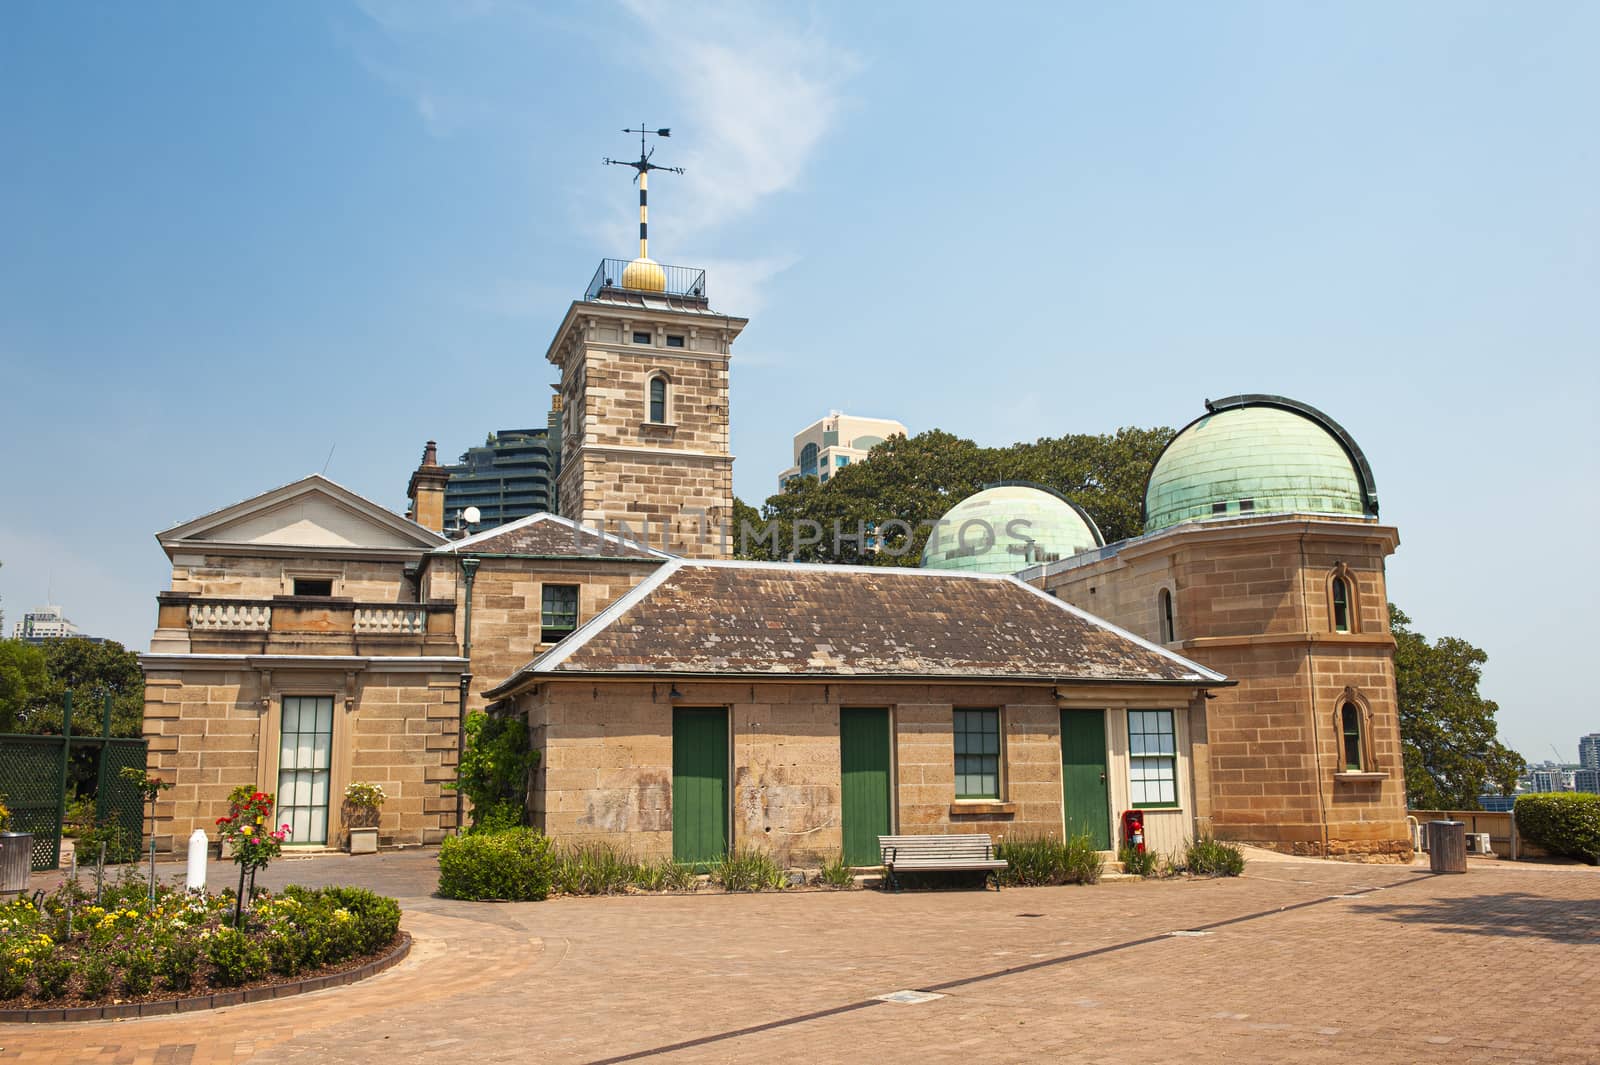 Sydney Observatory is an astronomical observatory, museum, meteorological station located on Observatory Hill in Sydney, New South Wells - Australia. It was built in 1859